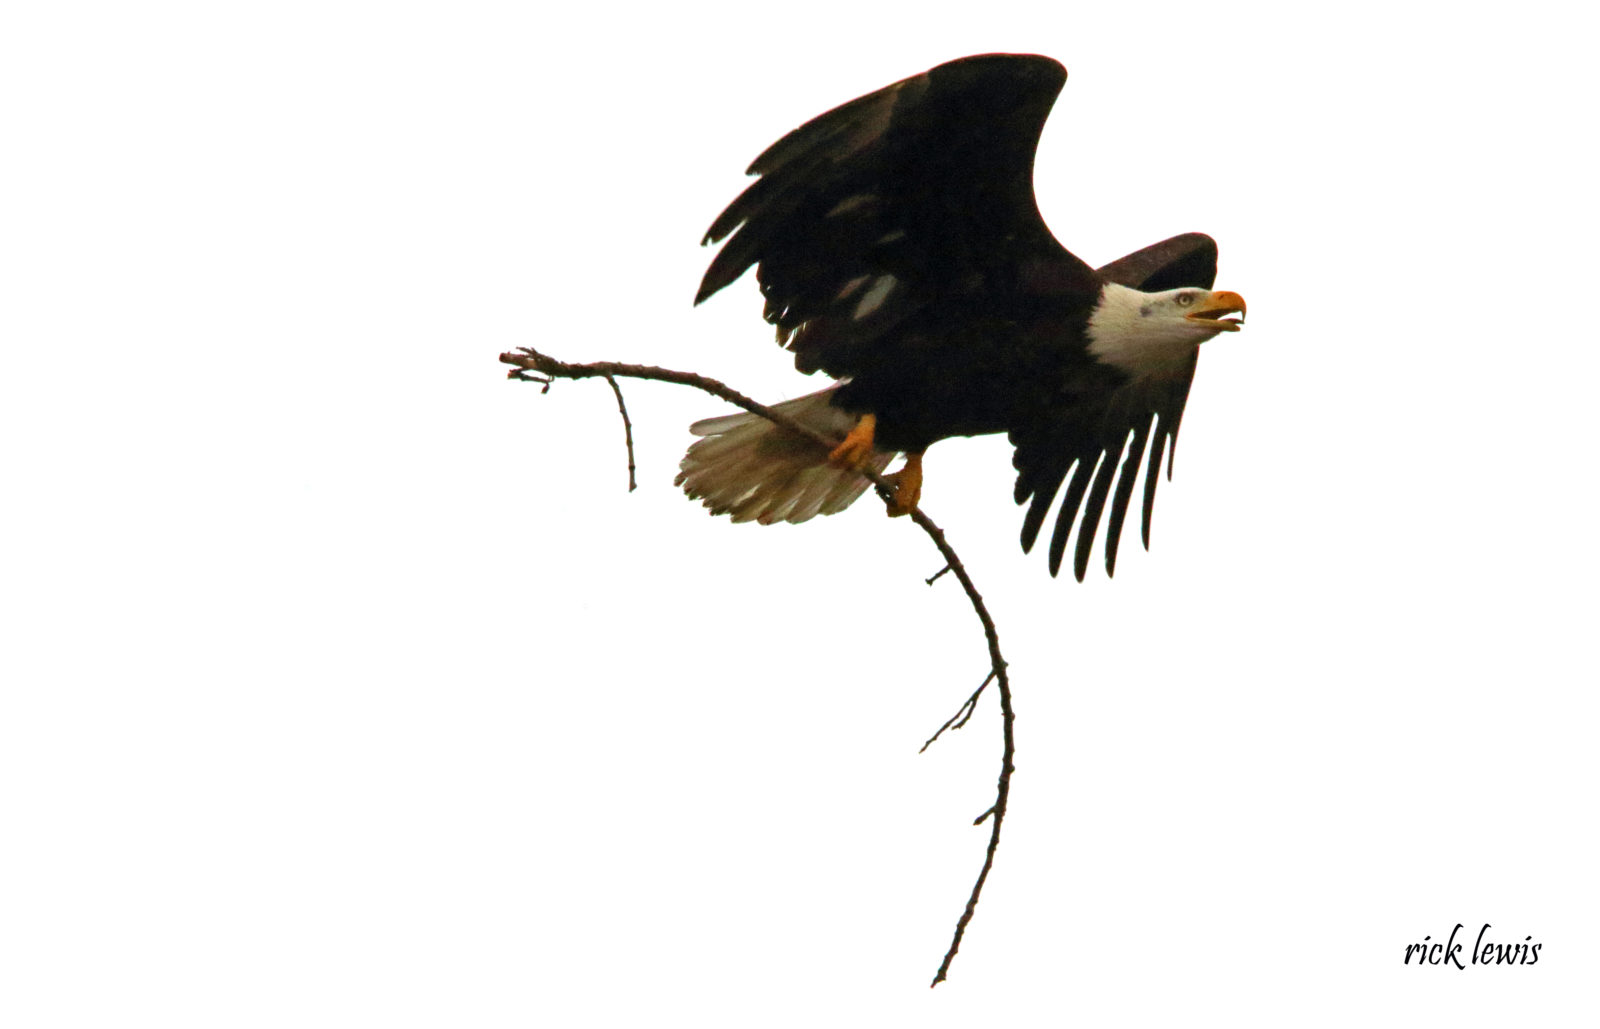 Bald eagle carrying stick